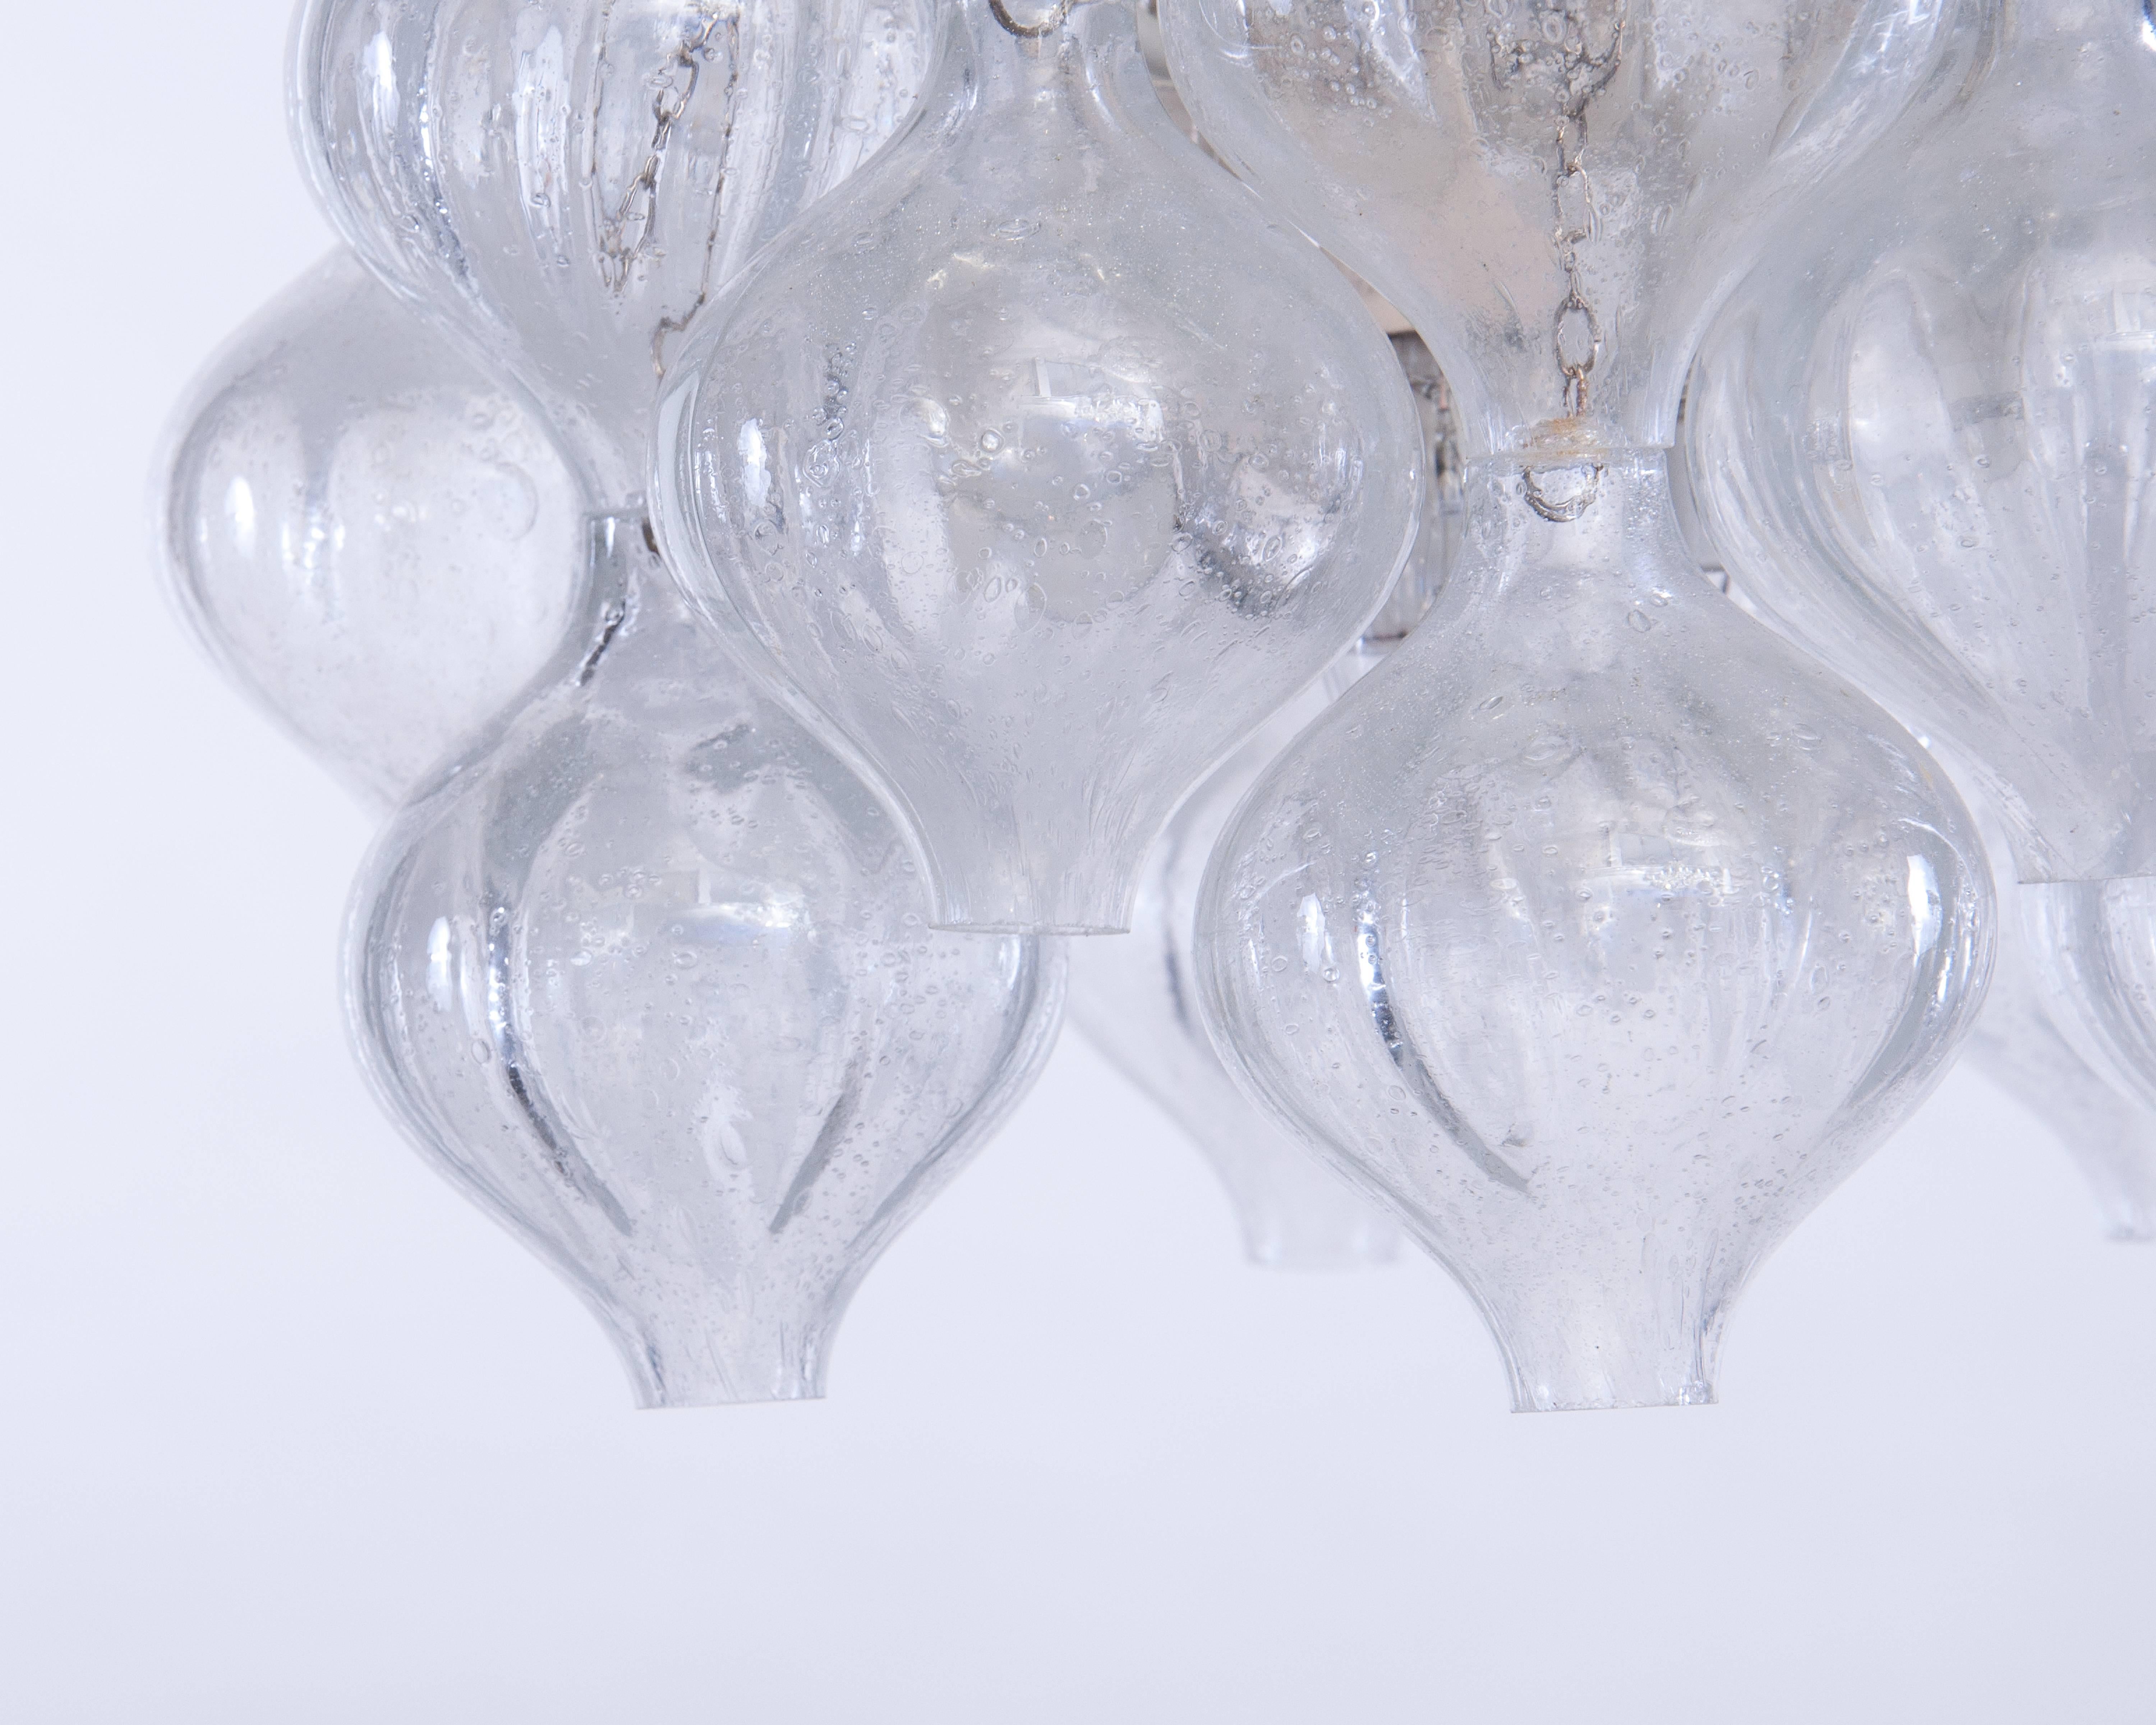 A beautiful midcentury chandelier by the famous designer J.T. Kalmar called Tulipan.
The chandelier consists of a white metal structure and has 12 arms, each arm has two handblown onion-shaped glass spheres.
The spheres are attached to the frame